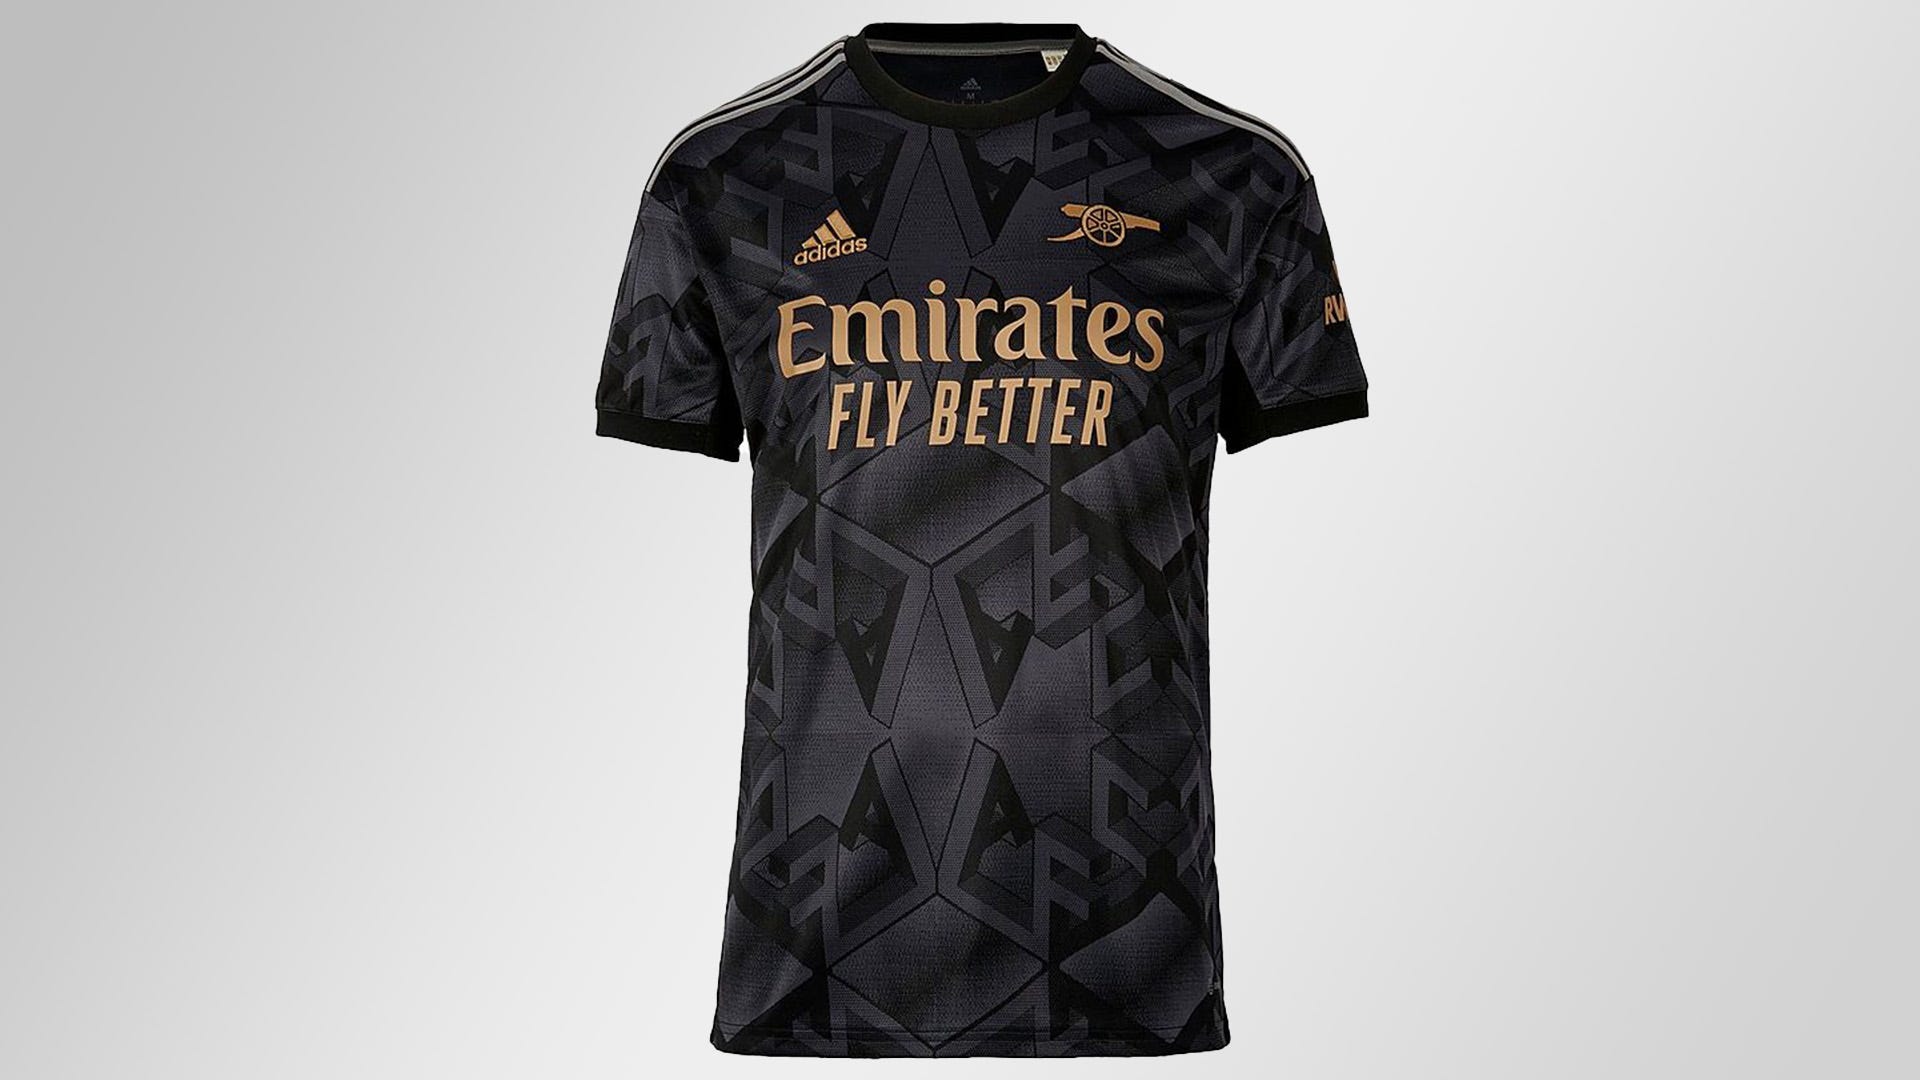 Arsenal unveil new black and gold away kit in tribute 'Little Islingtons' around the world | Goal.com Singapore